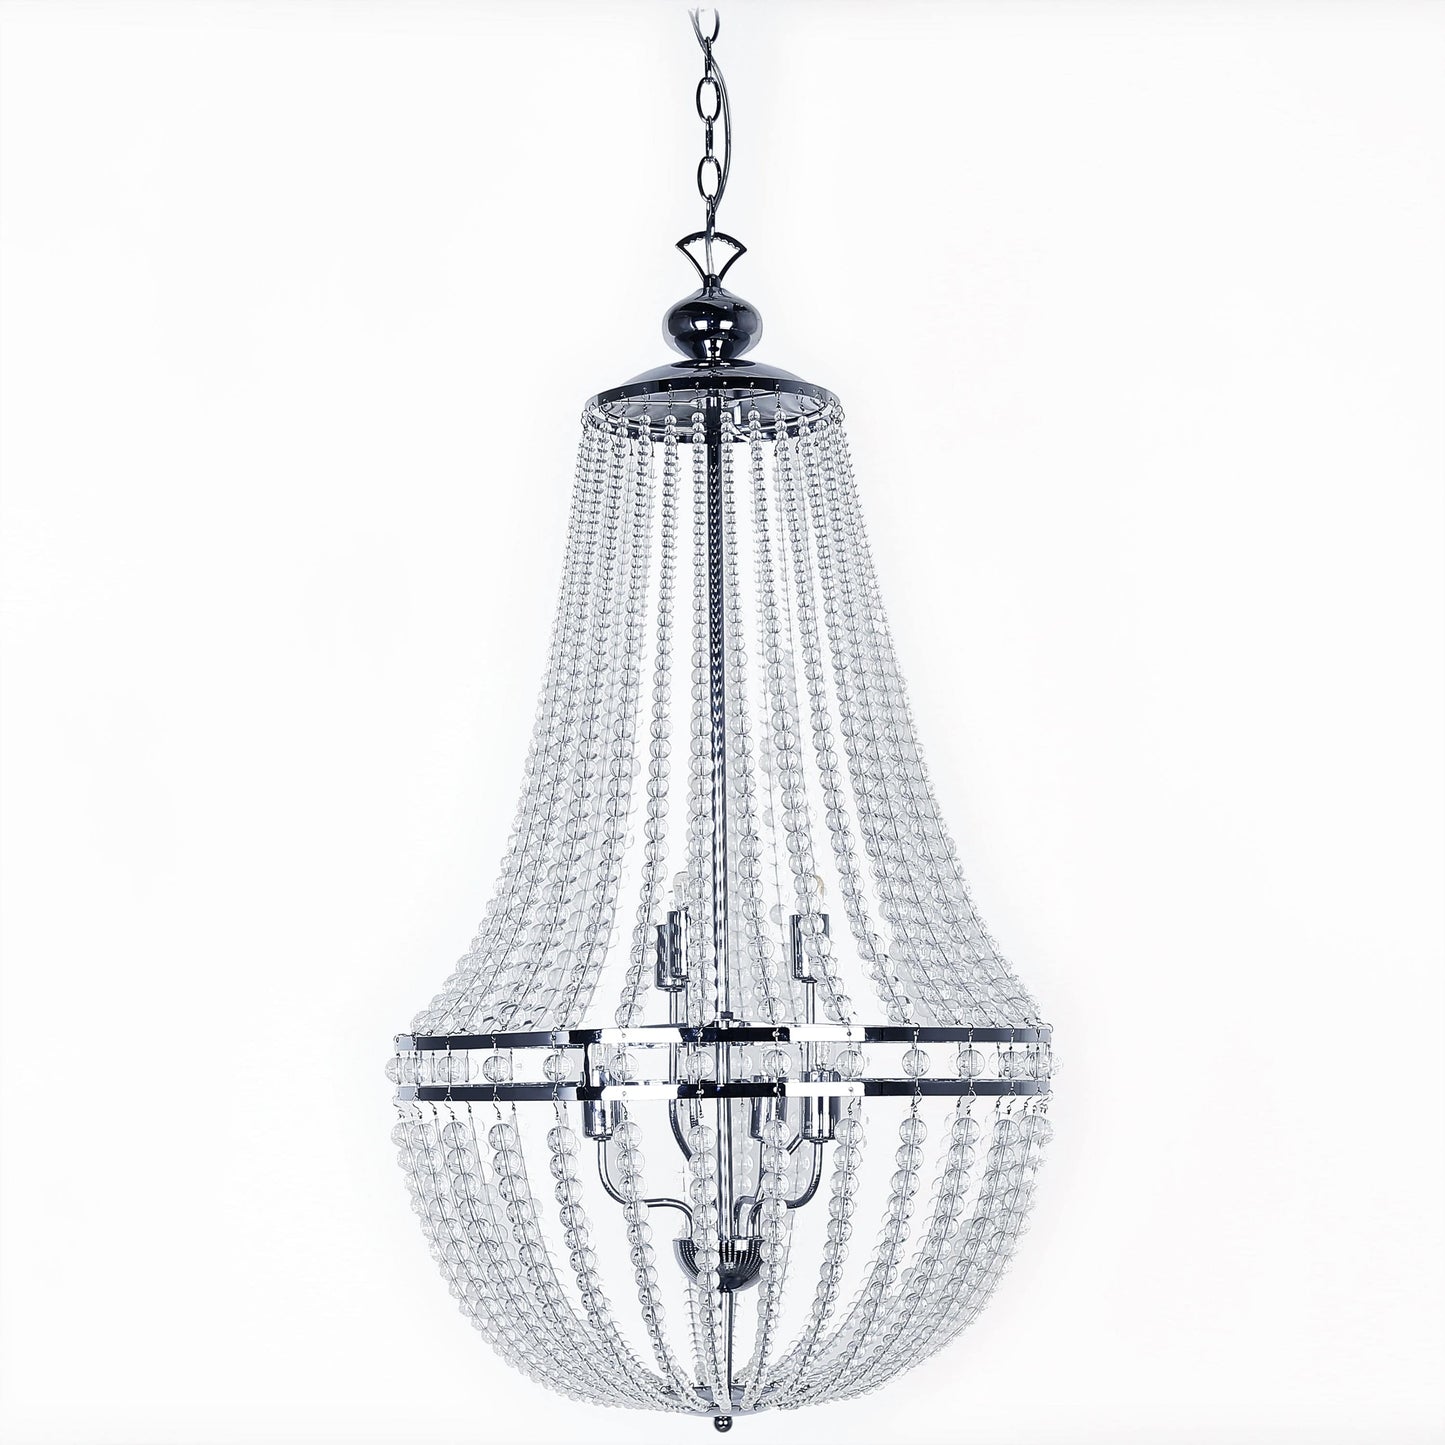 Dainolite 6-Light Incandescent Chandelier in Polished Chrome Finish with Clear Glass Beads